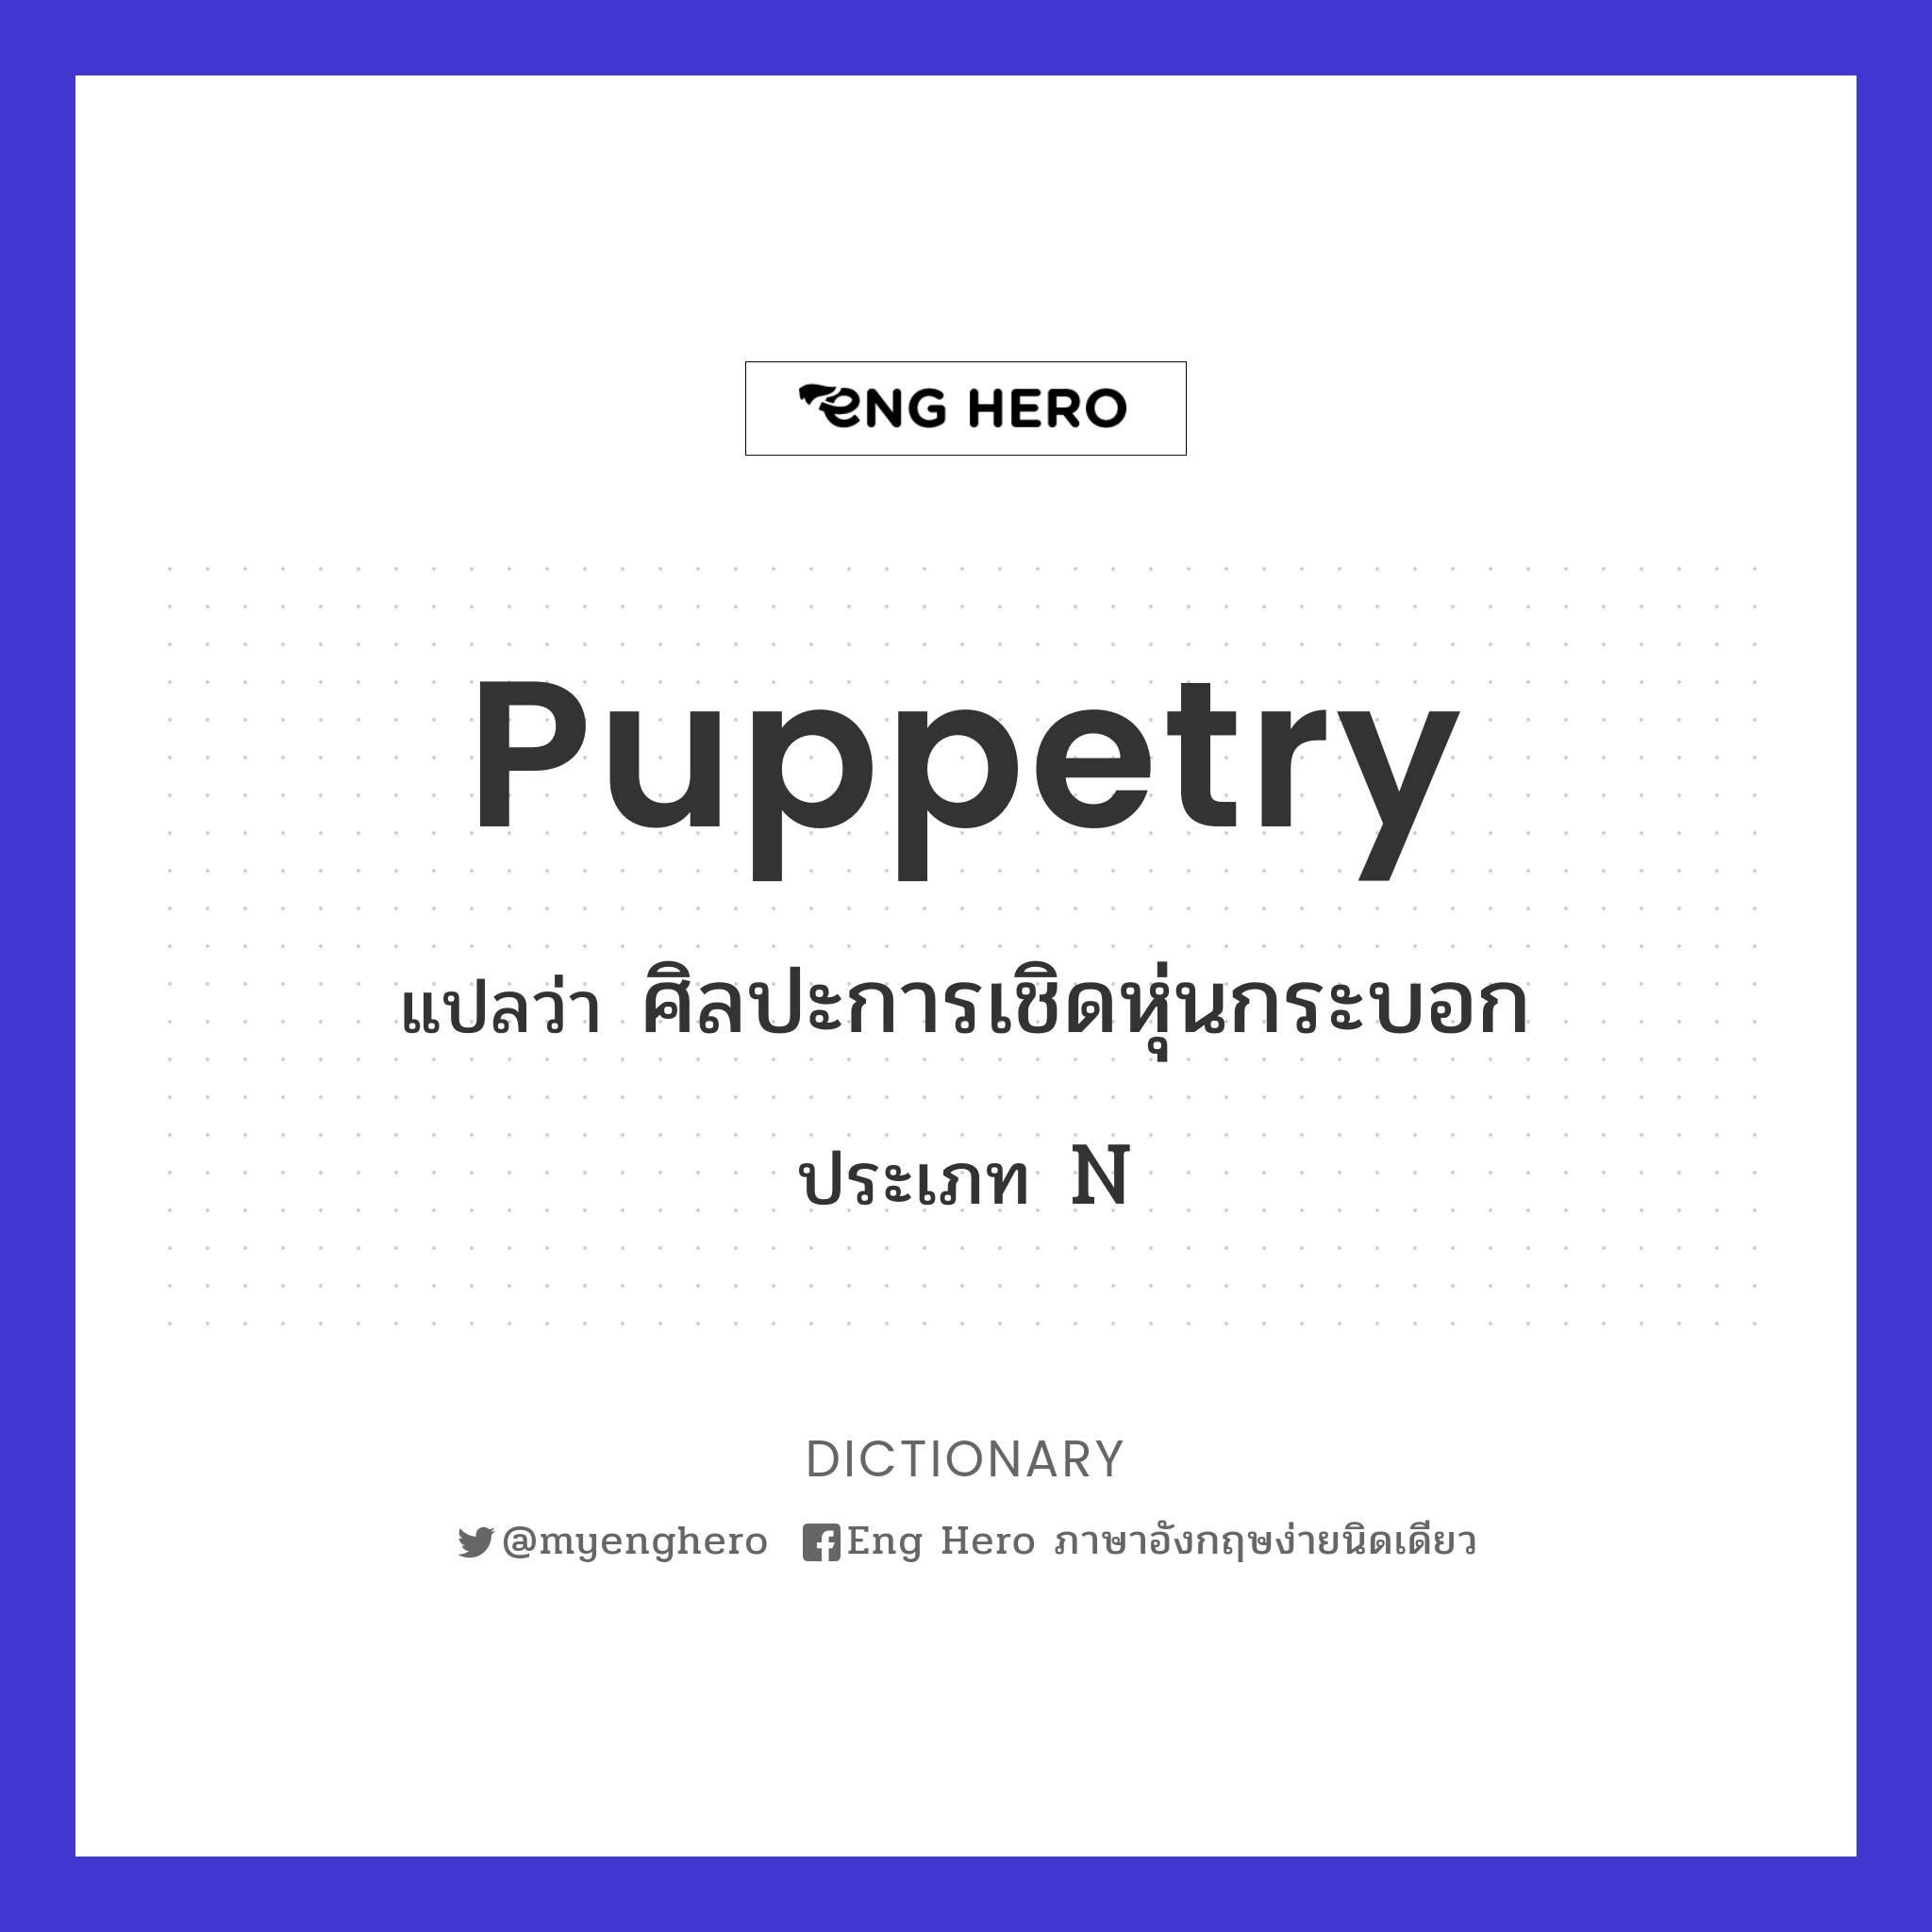 puppetry